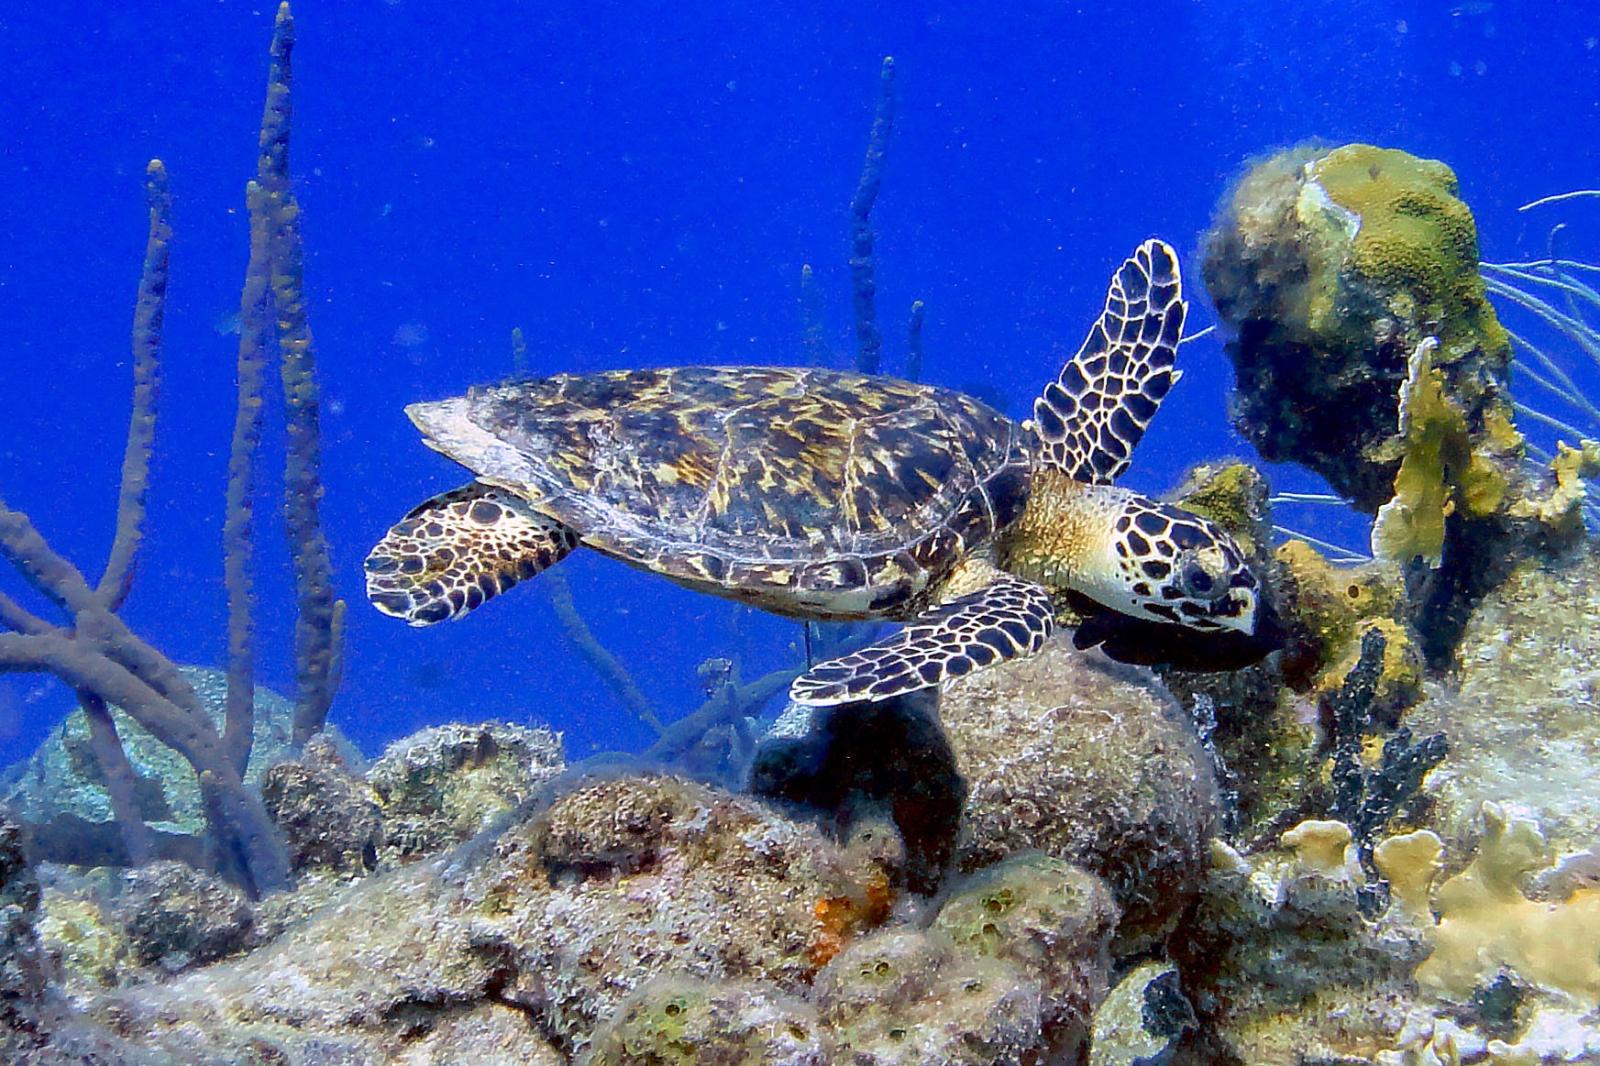 A hawksbill turtle is seen during a dive as students gather data on aquatic life in the waters off of Bonaire.